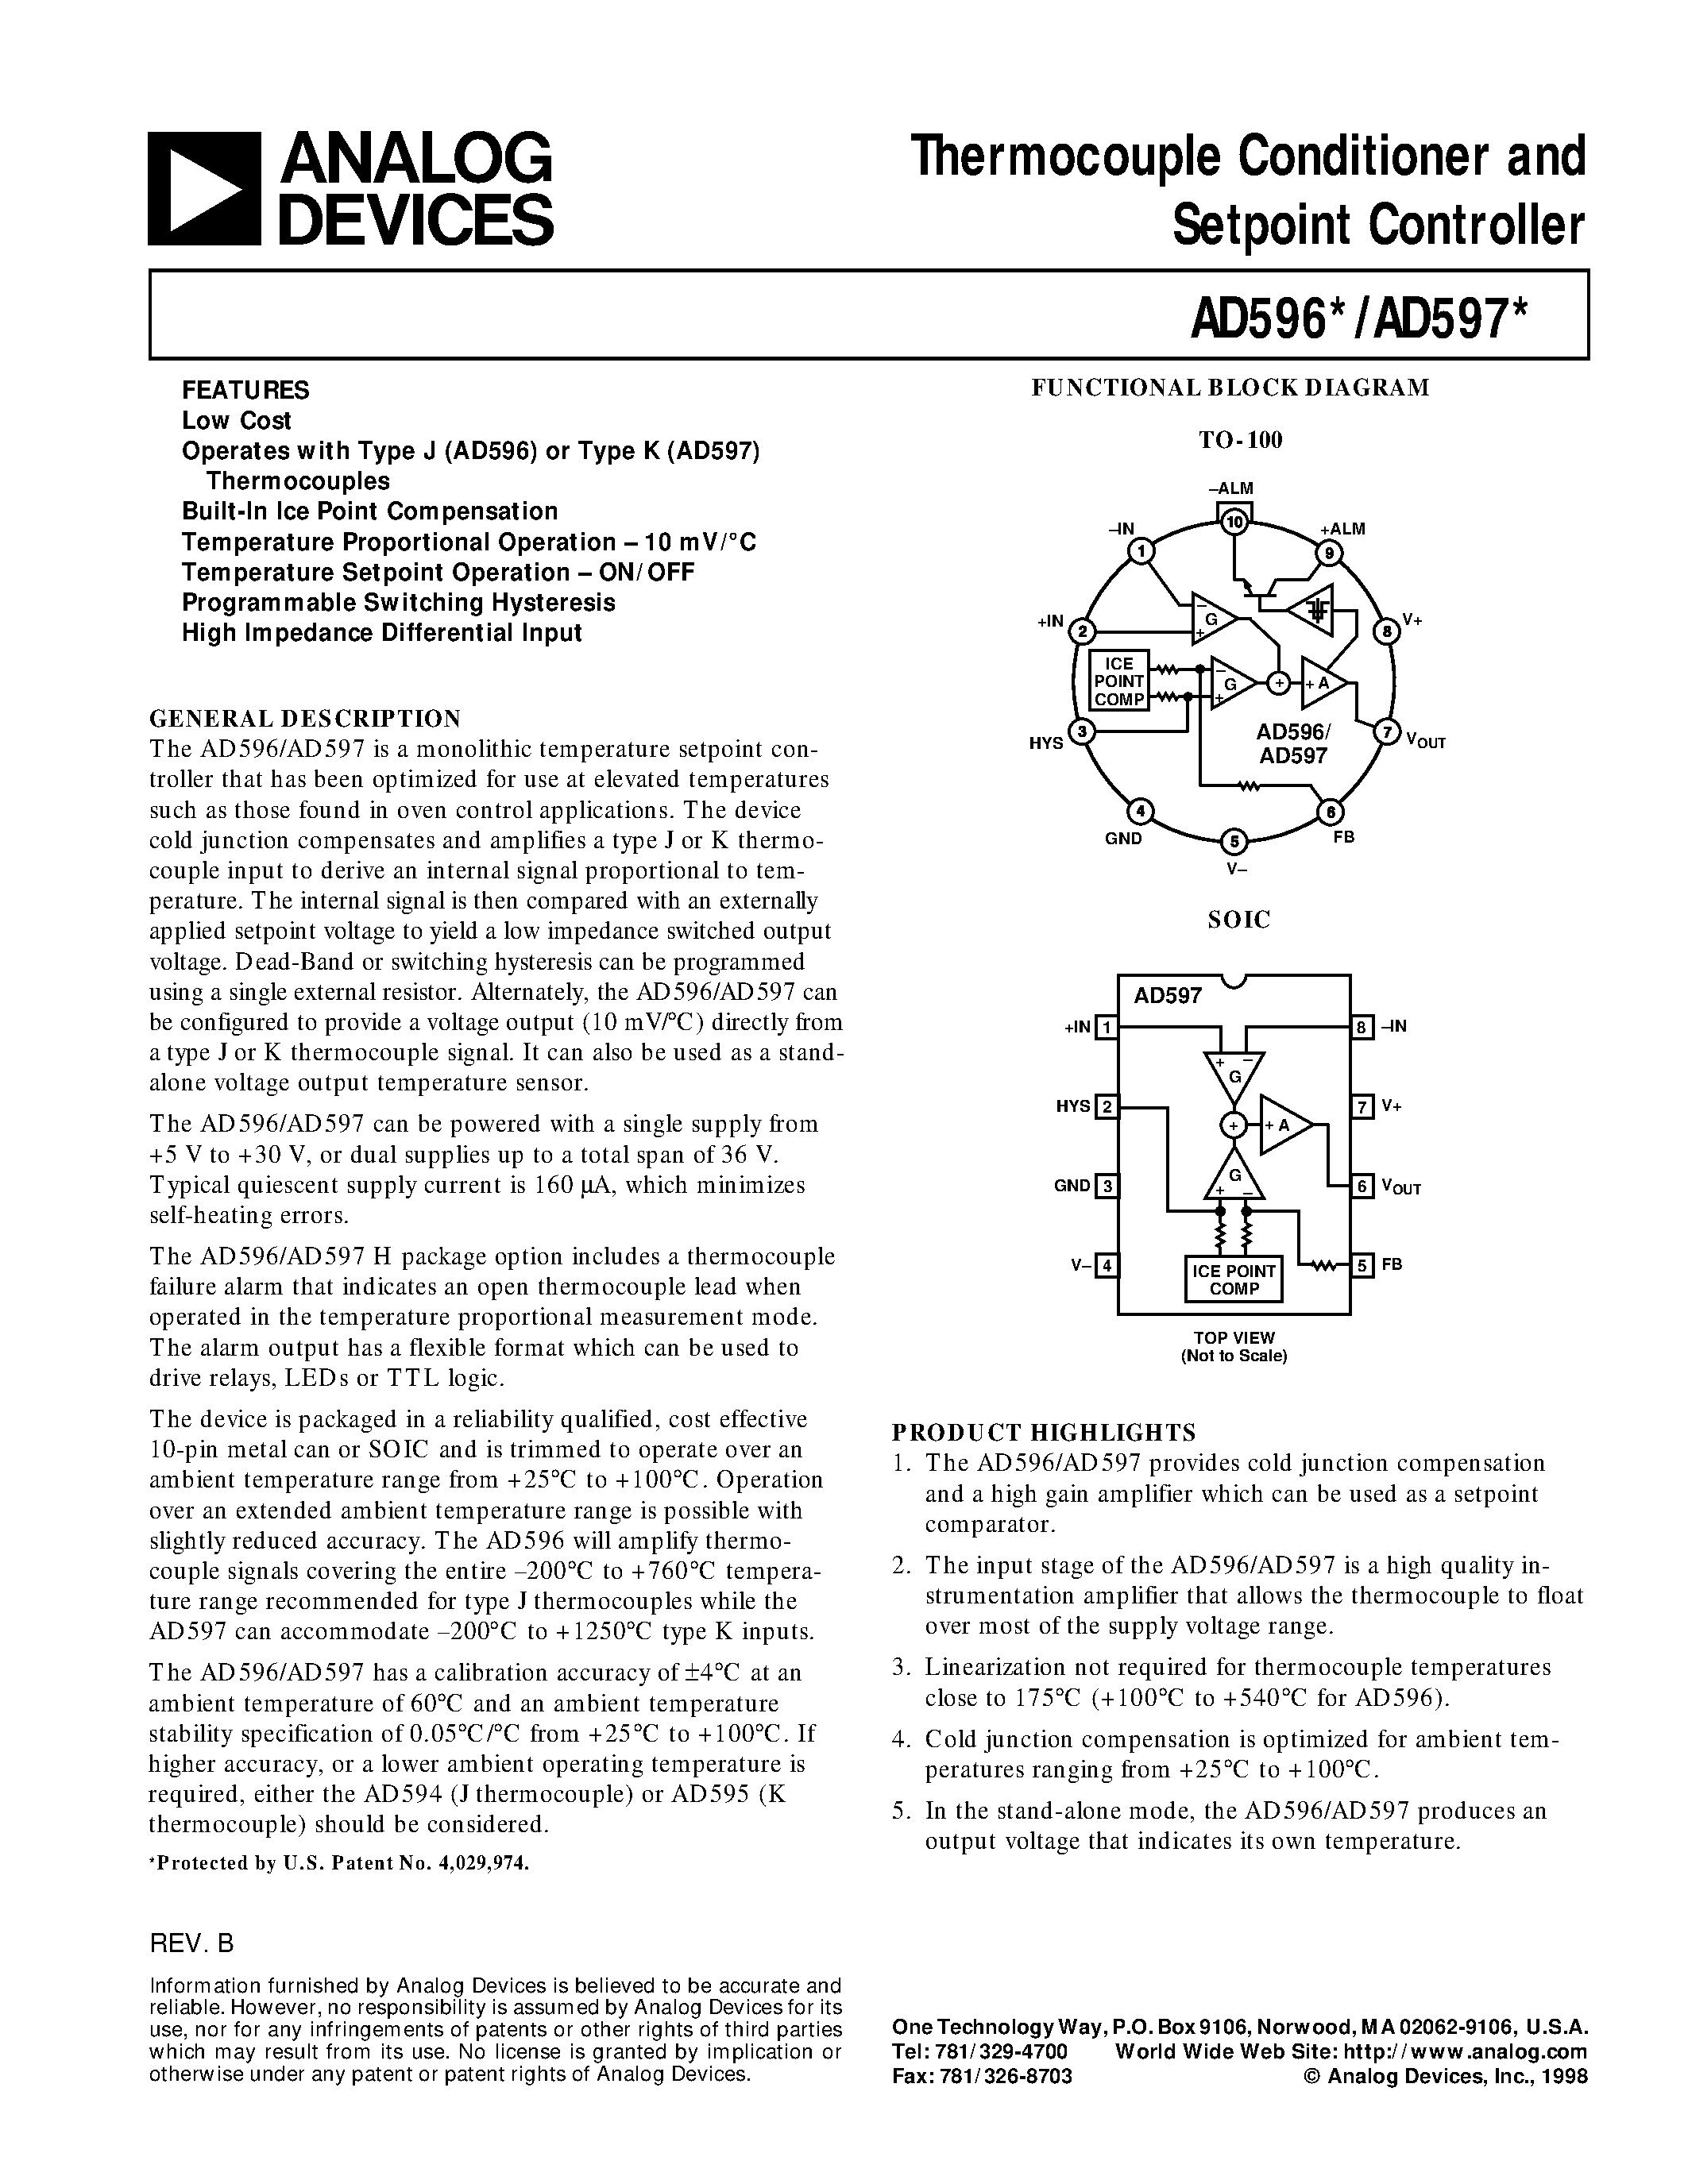 Datasheet AD597AR - Thermocouple Conditioner and Setpoint Controller page 1